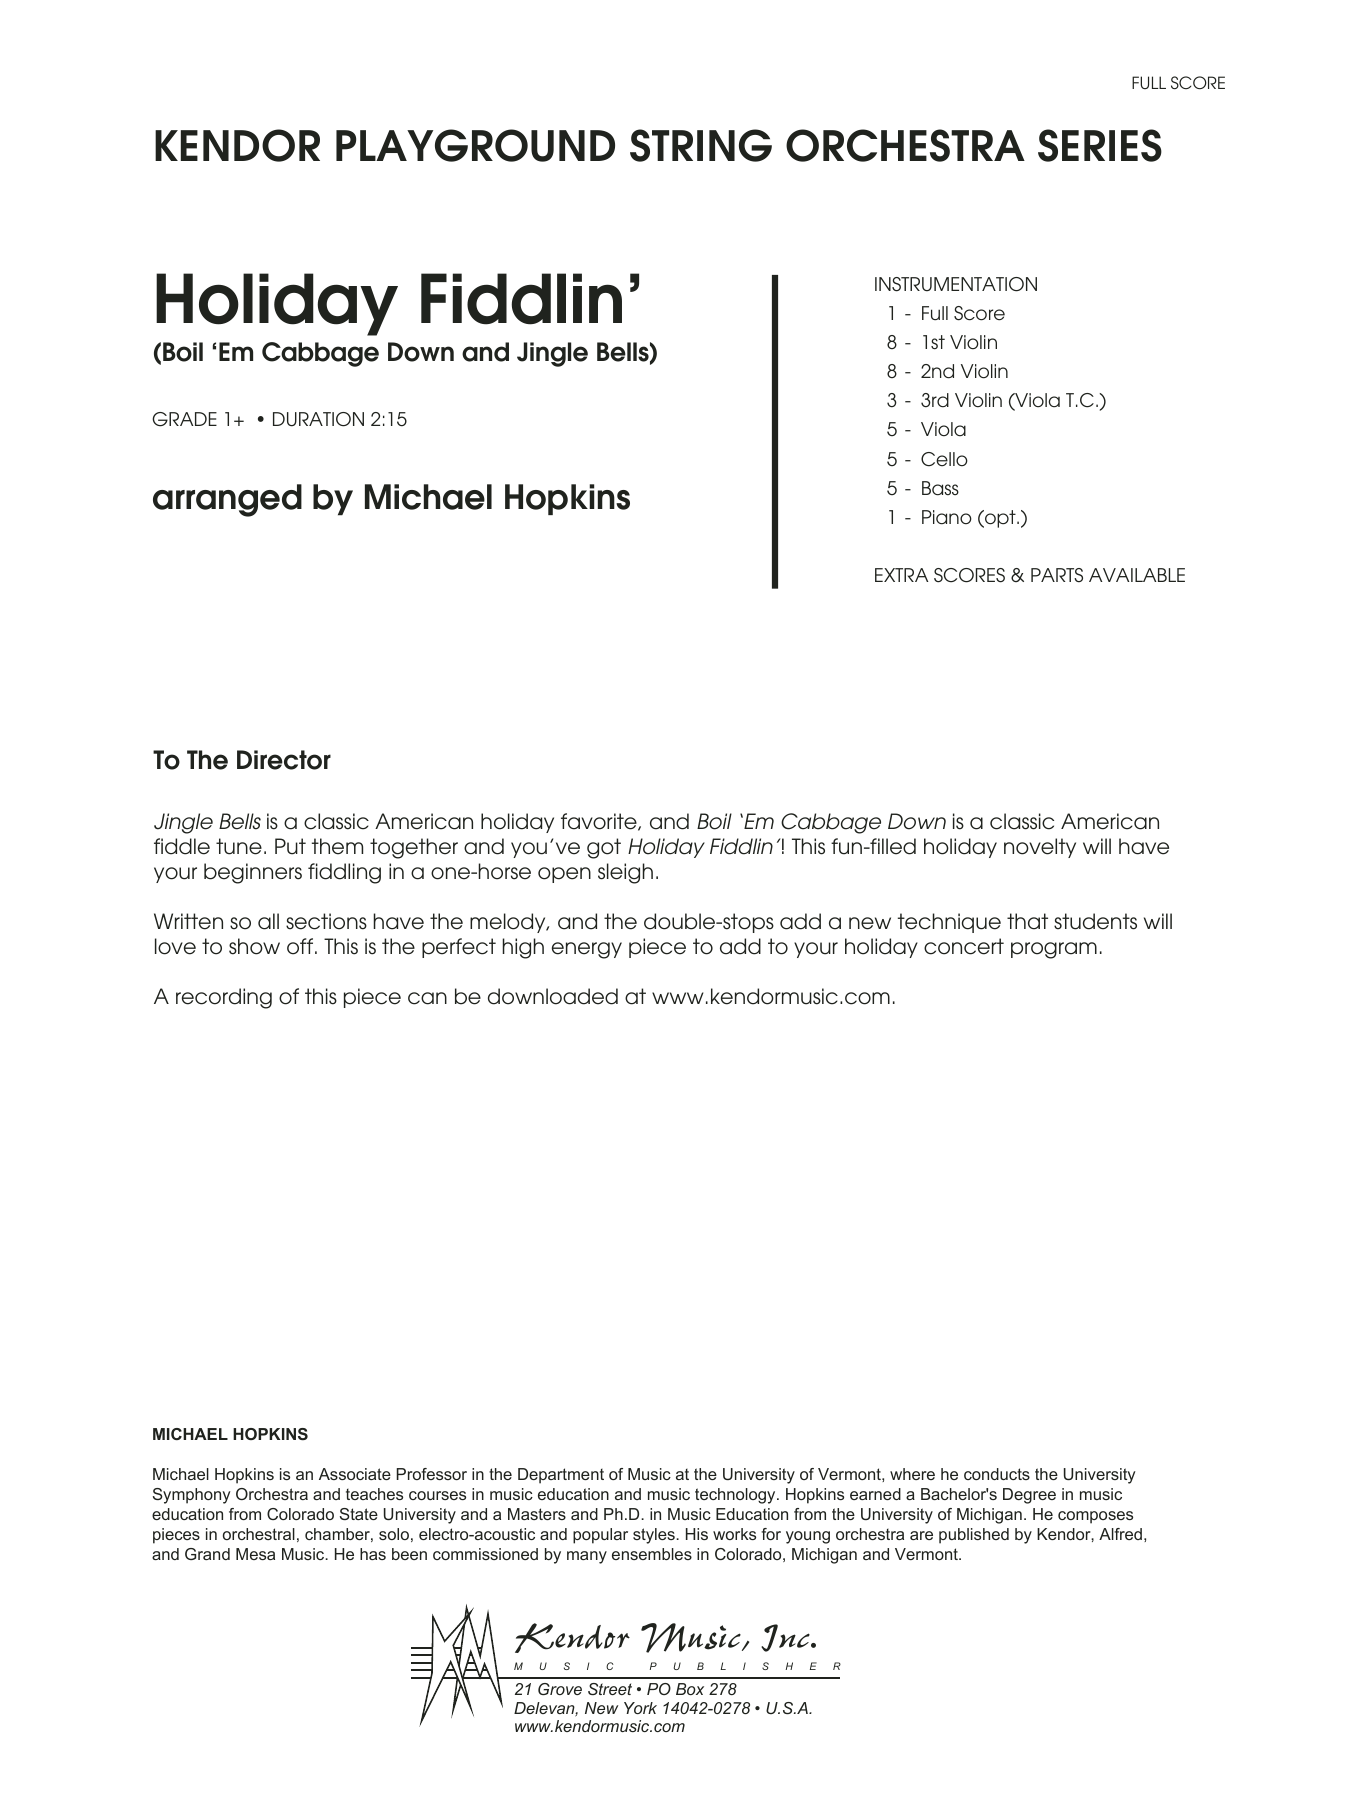 Holiday Fiddlin' (Boil 'Em Cabbage Down and Jingle Bells) - Full Score (Orchestra) von Michael Hopkins